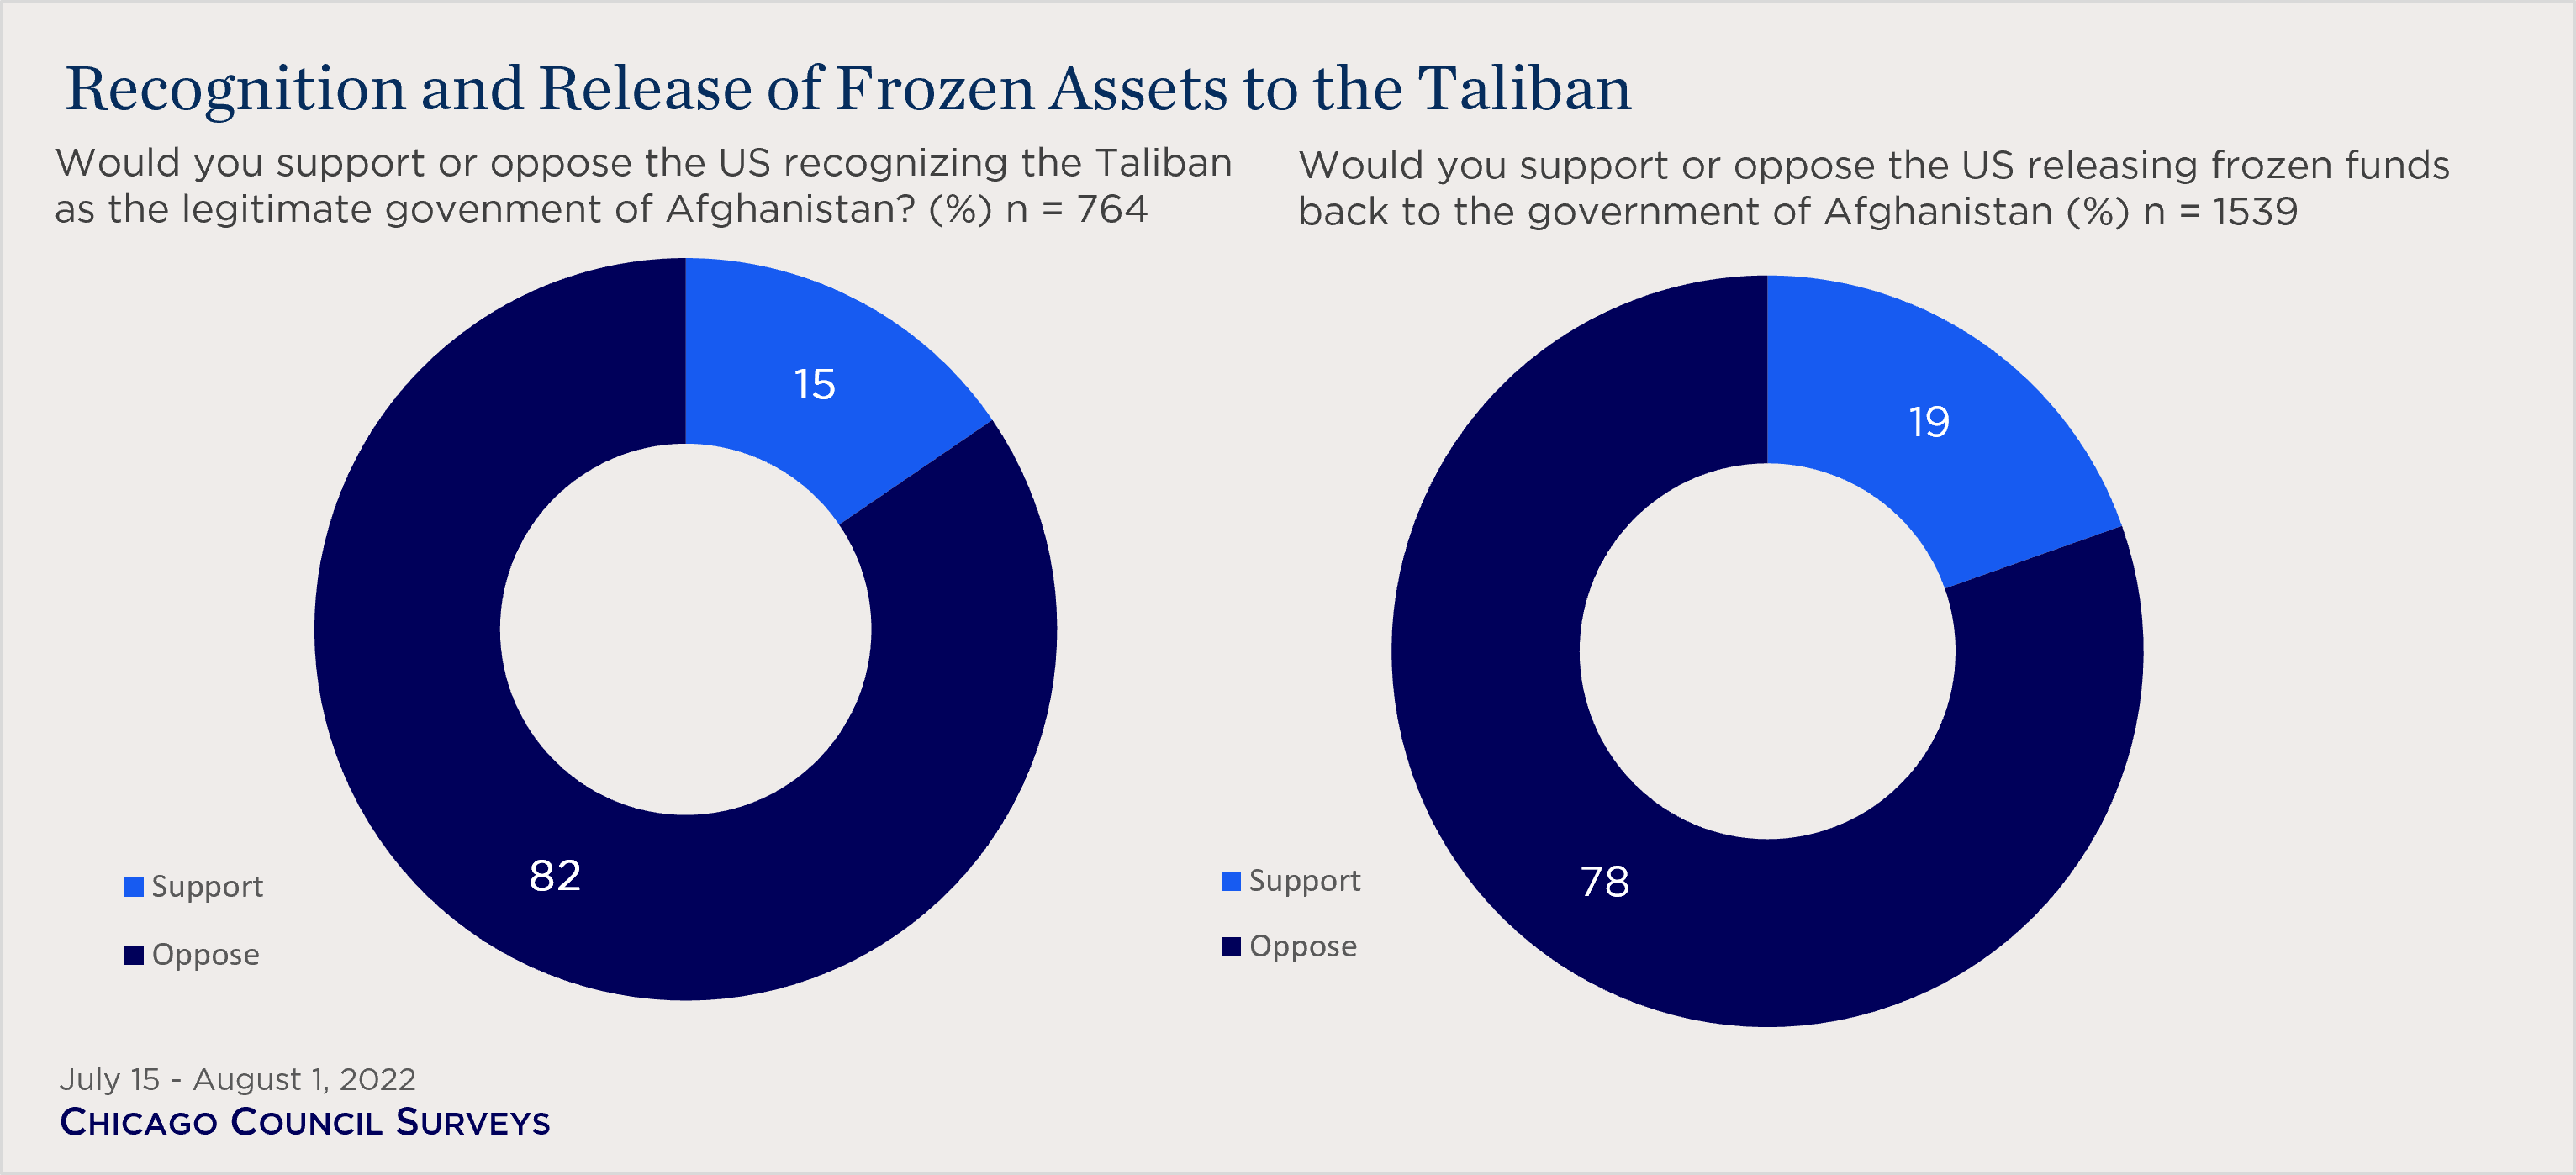 "pie chart showing views on recognizing the Taliban government and releasing frozen assets"